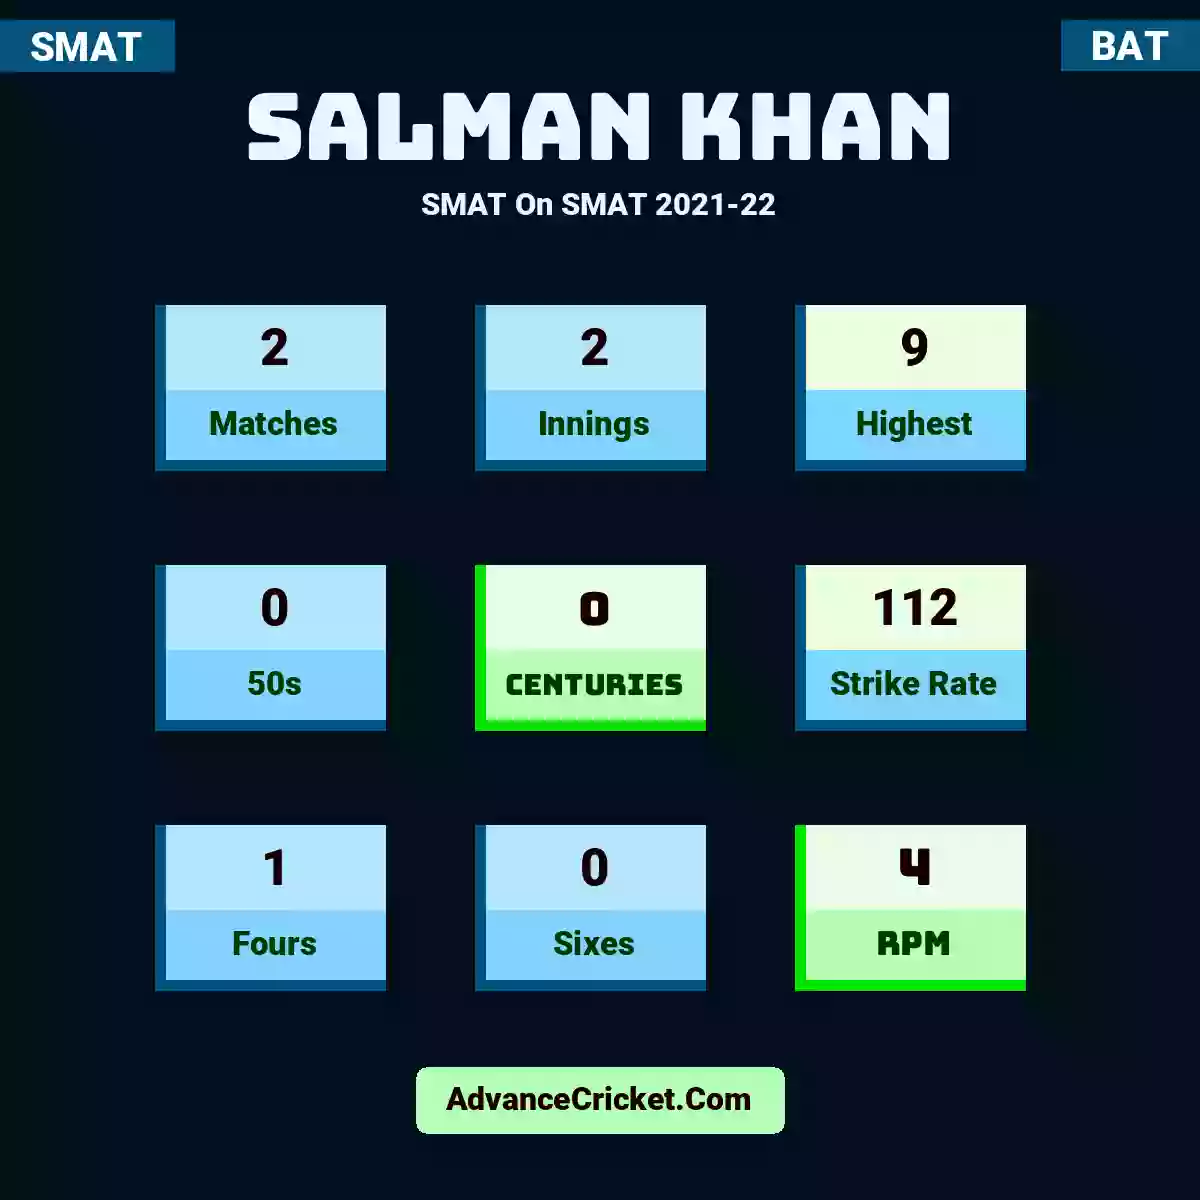 Salman Khan SMAT  On SMAT 2021-22, Salman Khan played 2 matches, scored 9 runs as highest, 0 half-centuries, and 0 centuries, with a strike rate of 112. S.Khan hit 1 fours and 0 sixes, with an RPM of 4.